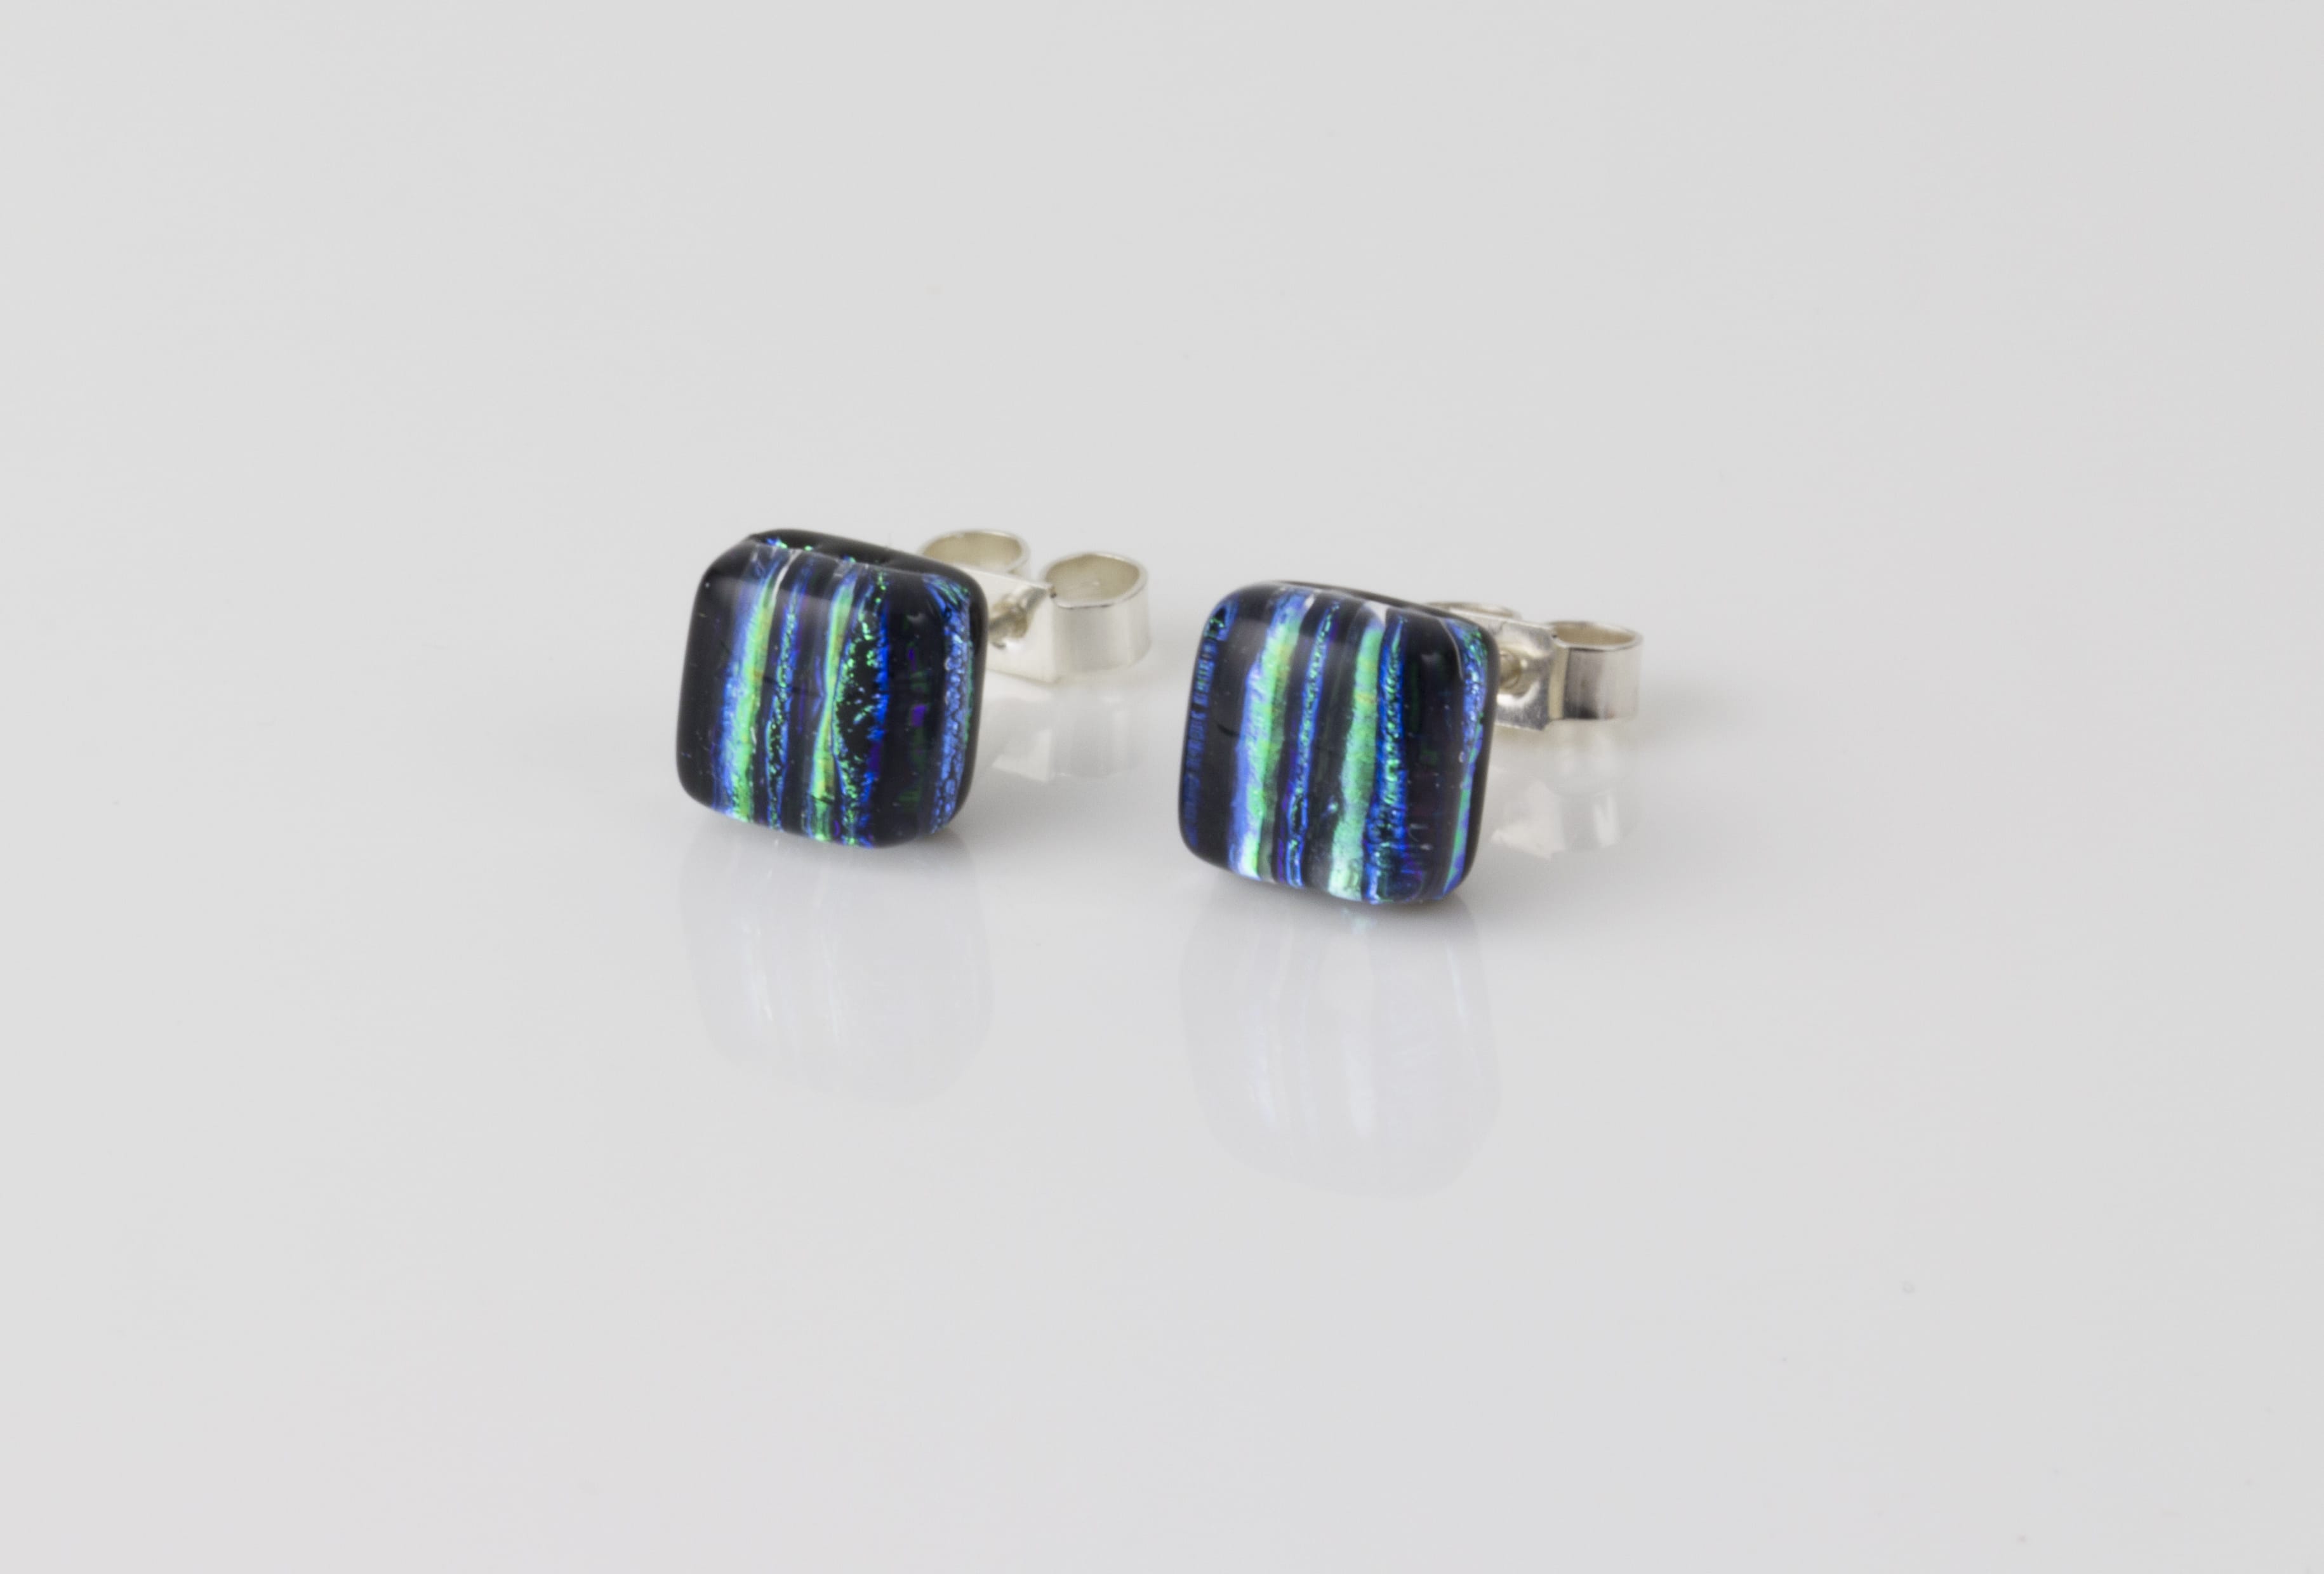 Dichroic jewellery uk, handmade stud earrings with striped green, yellow, black, blue. Square, glass 8-10mm, sterling silver